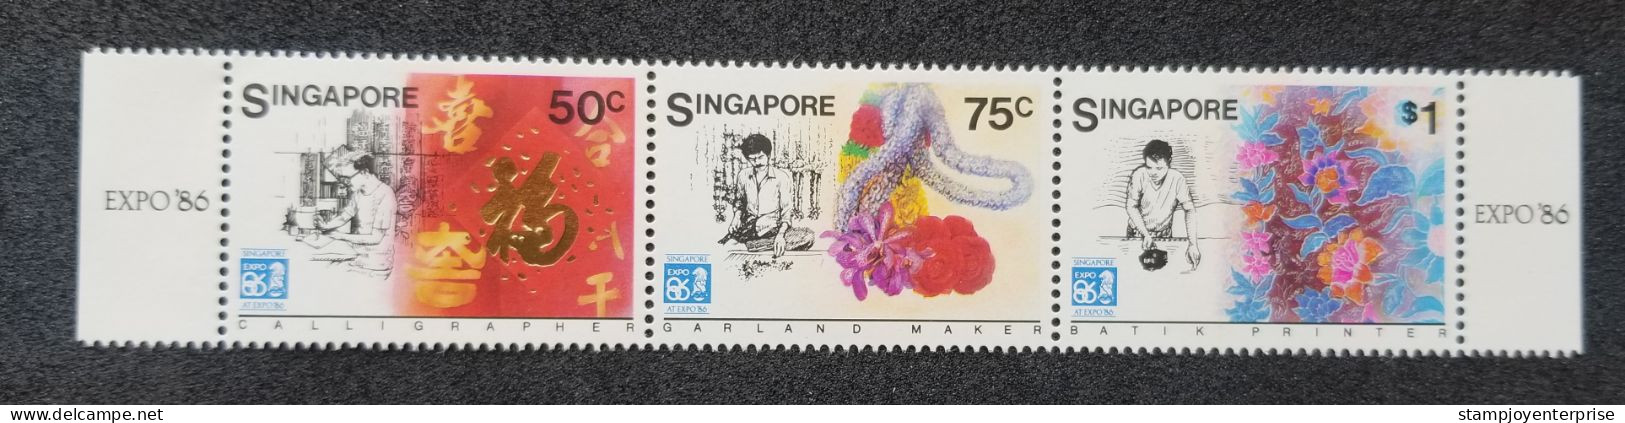 Singapore Expo '86 1986 Art Orchid Flower Calligraphy Batik Craft Orchids (stamp) MNH - Singapore (1959-...)